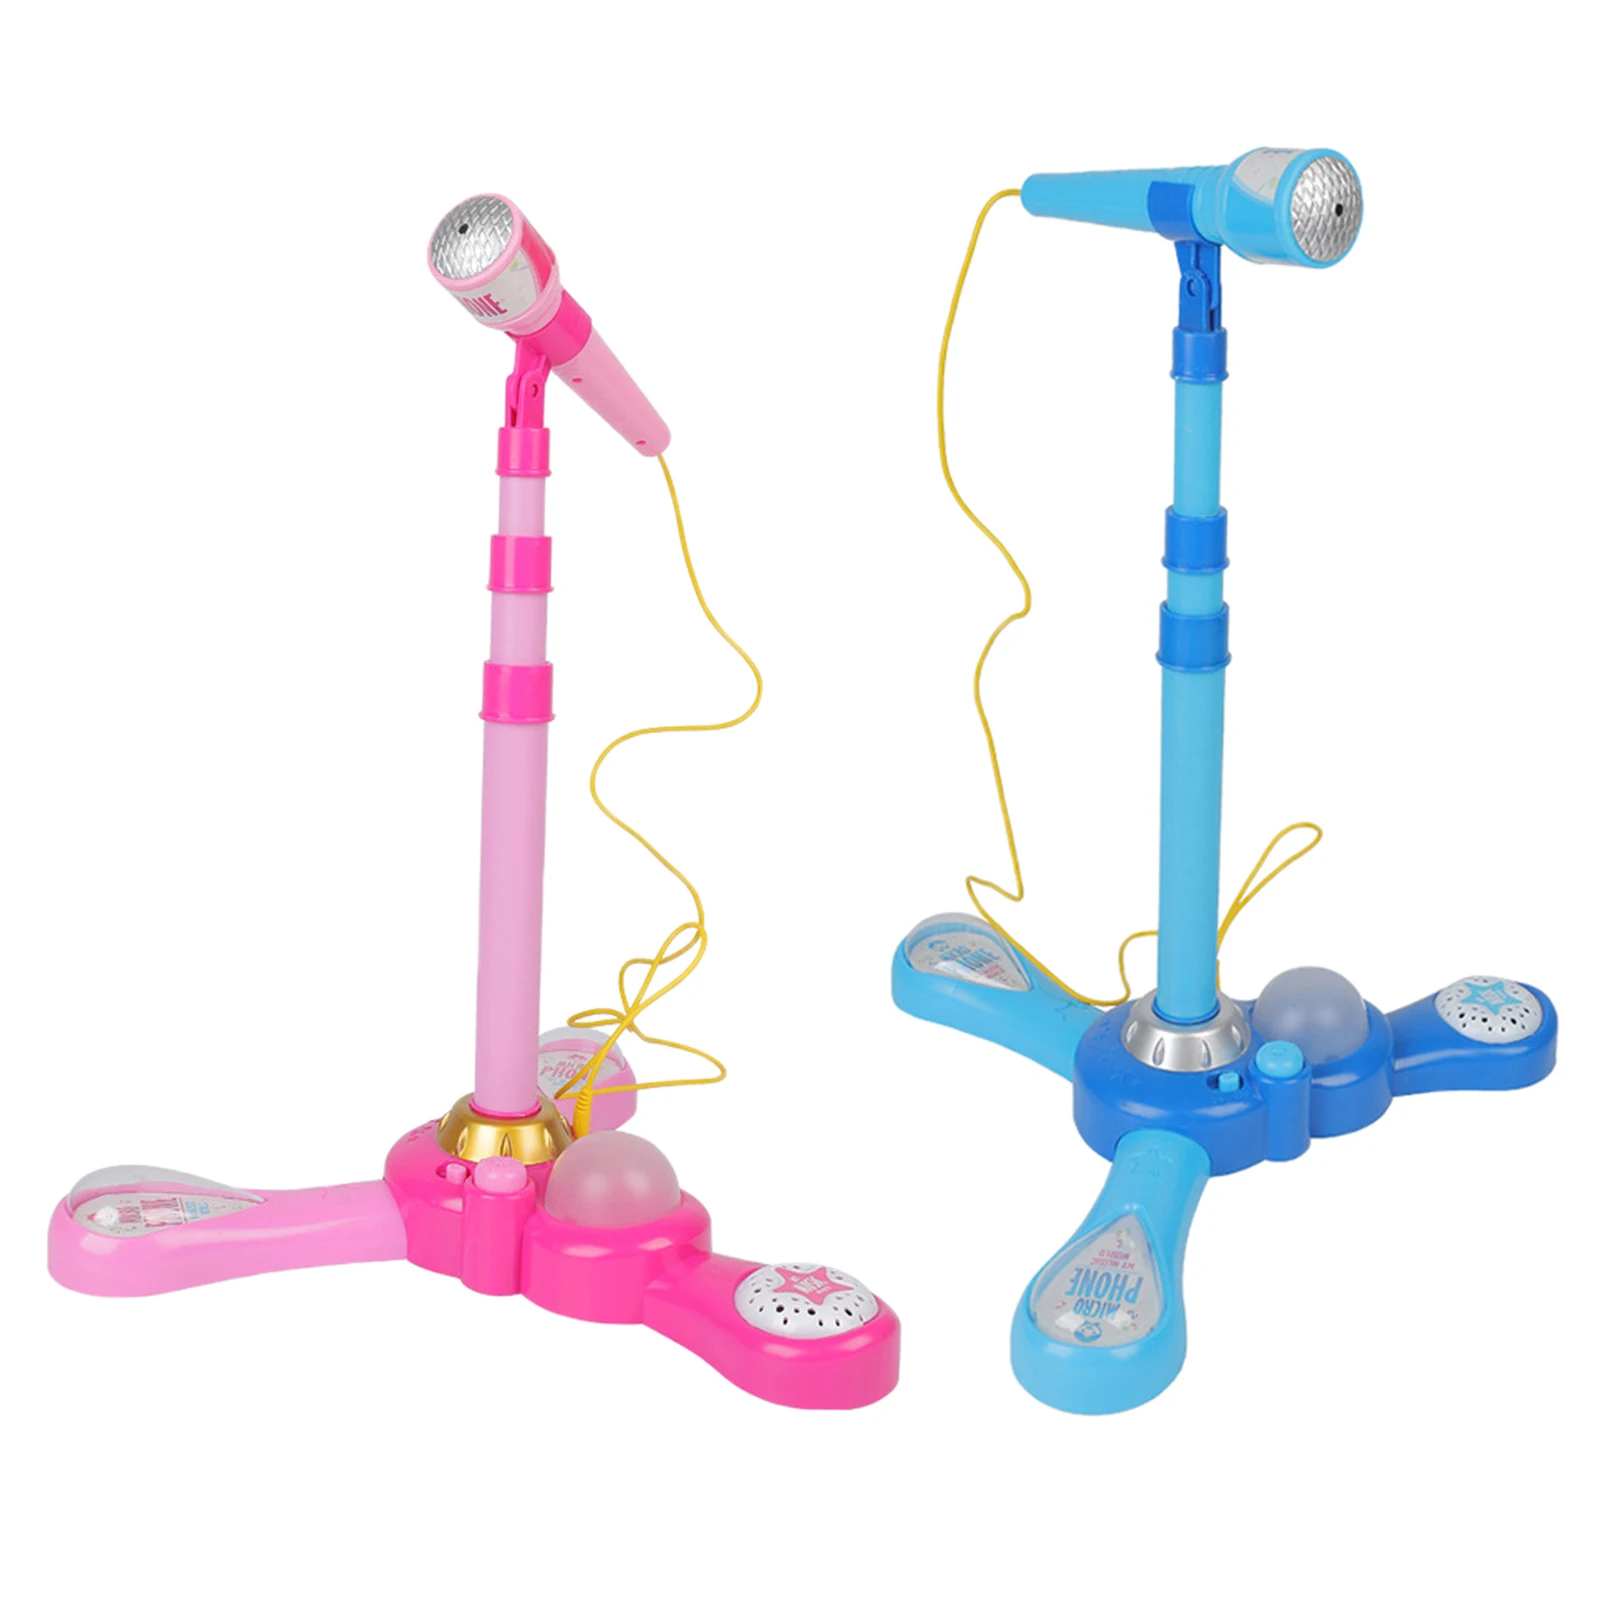 Adjustable Karaoke Machine Toy Microphone Set Singing Musical Portable Educational with Stand Connect to Mobile Phone